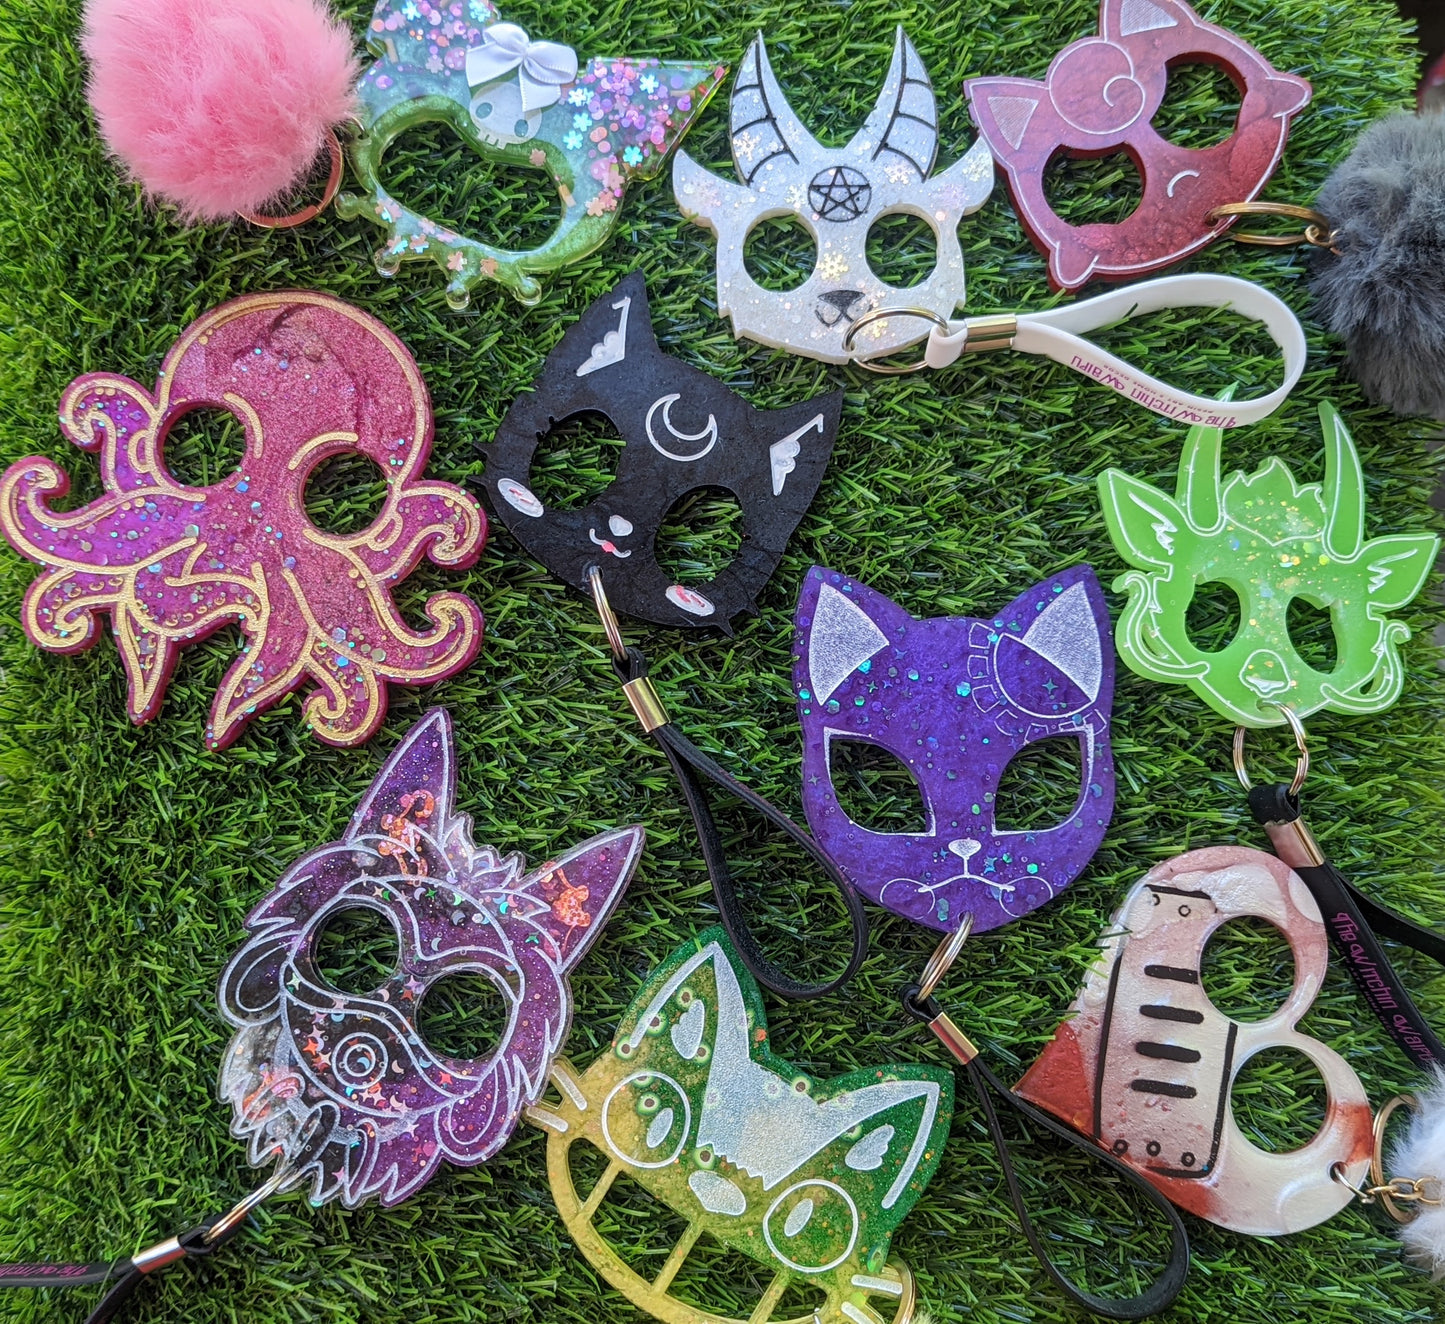 Mystery KeychainTake the mystery plunge and become the proud owner of a unique, one-of-a-kind keychain! With over 21 styles and colors to choose from, you'll always be the envy of yWitchin Waifu